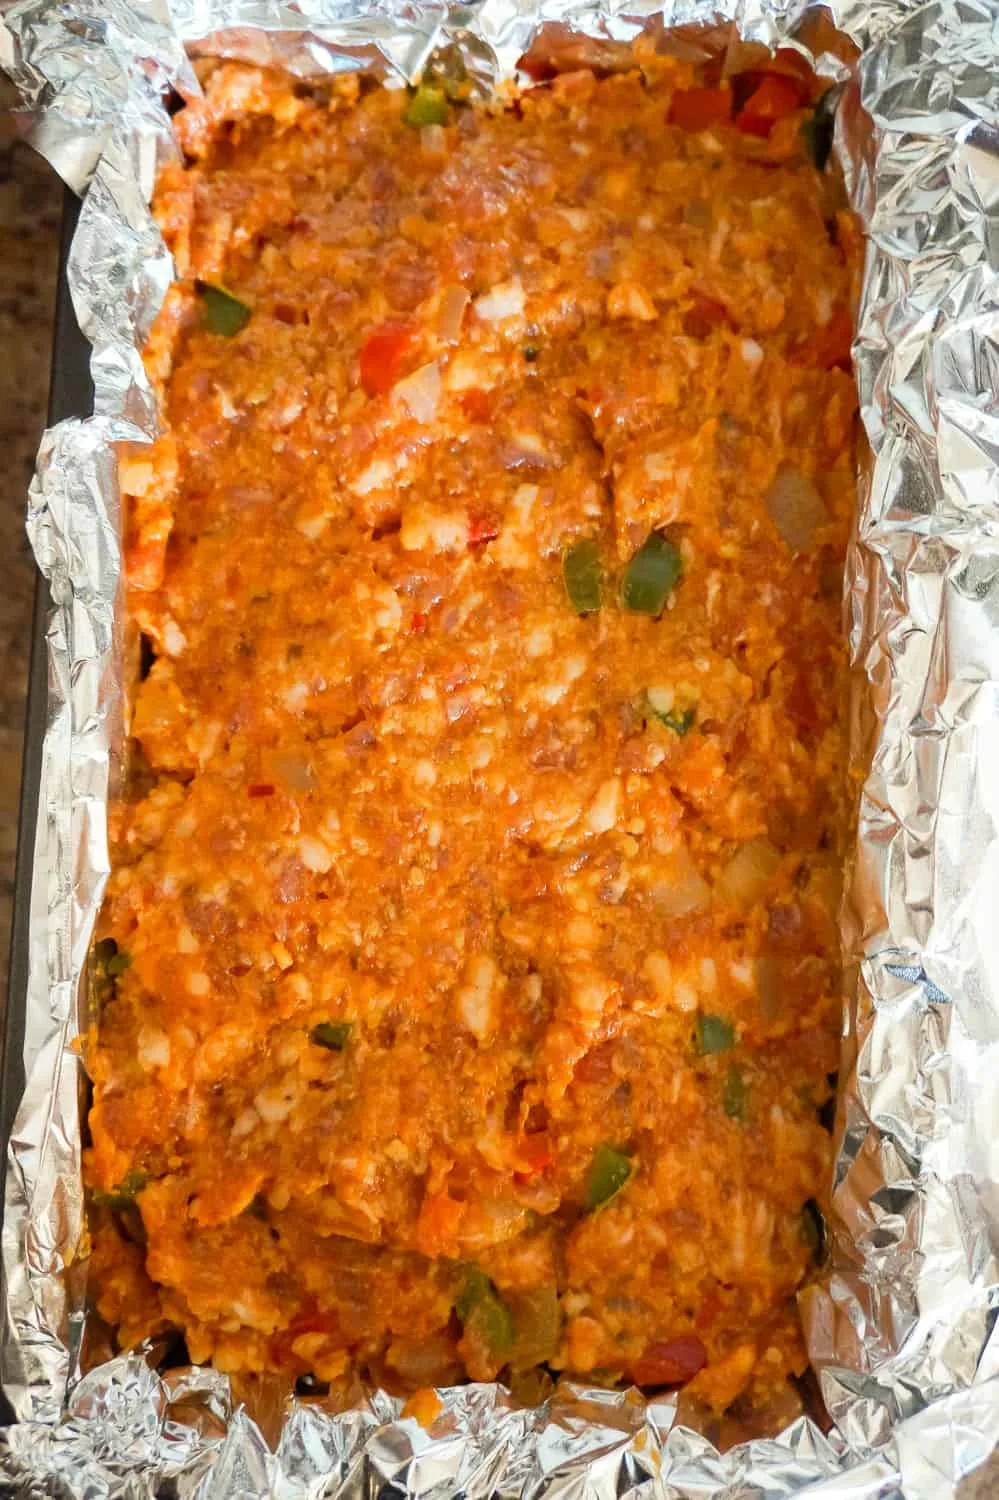 sausage and peppers meatloaf mixture pressed into a loaf pan before baking